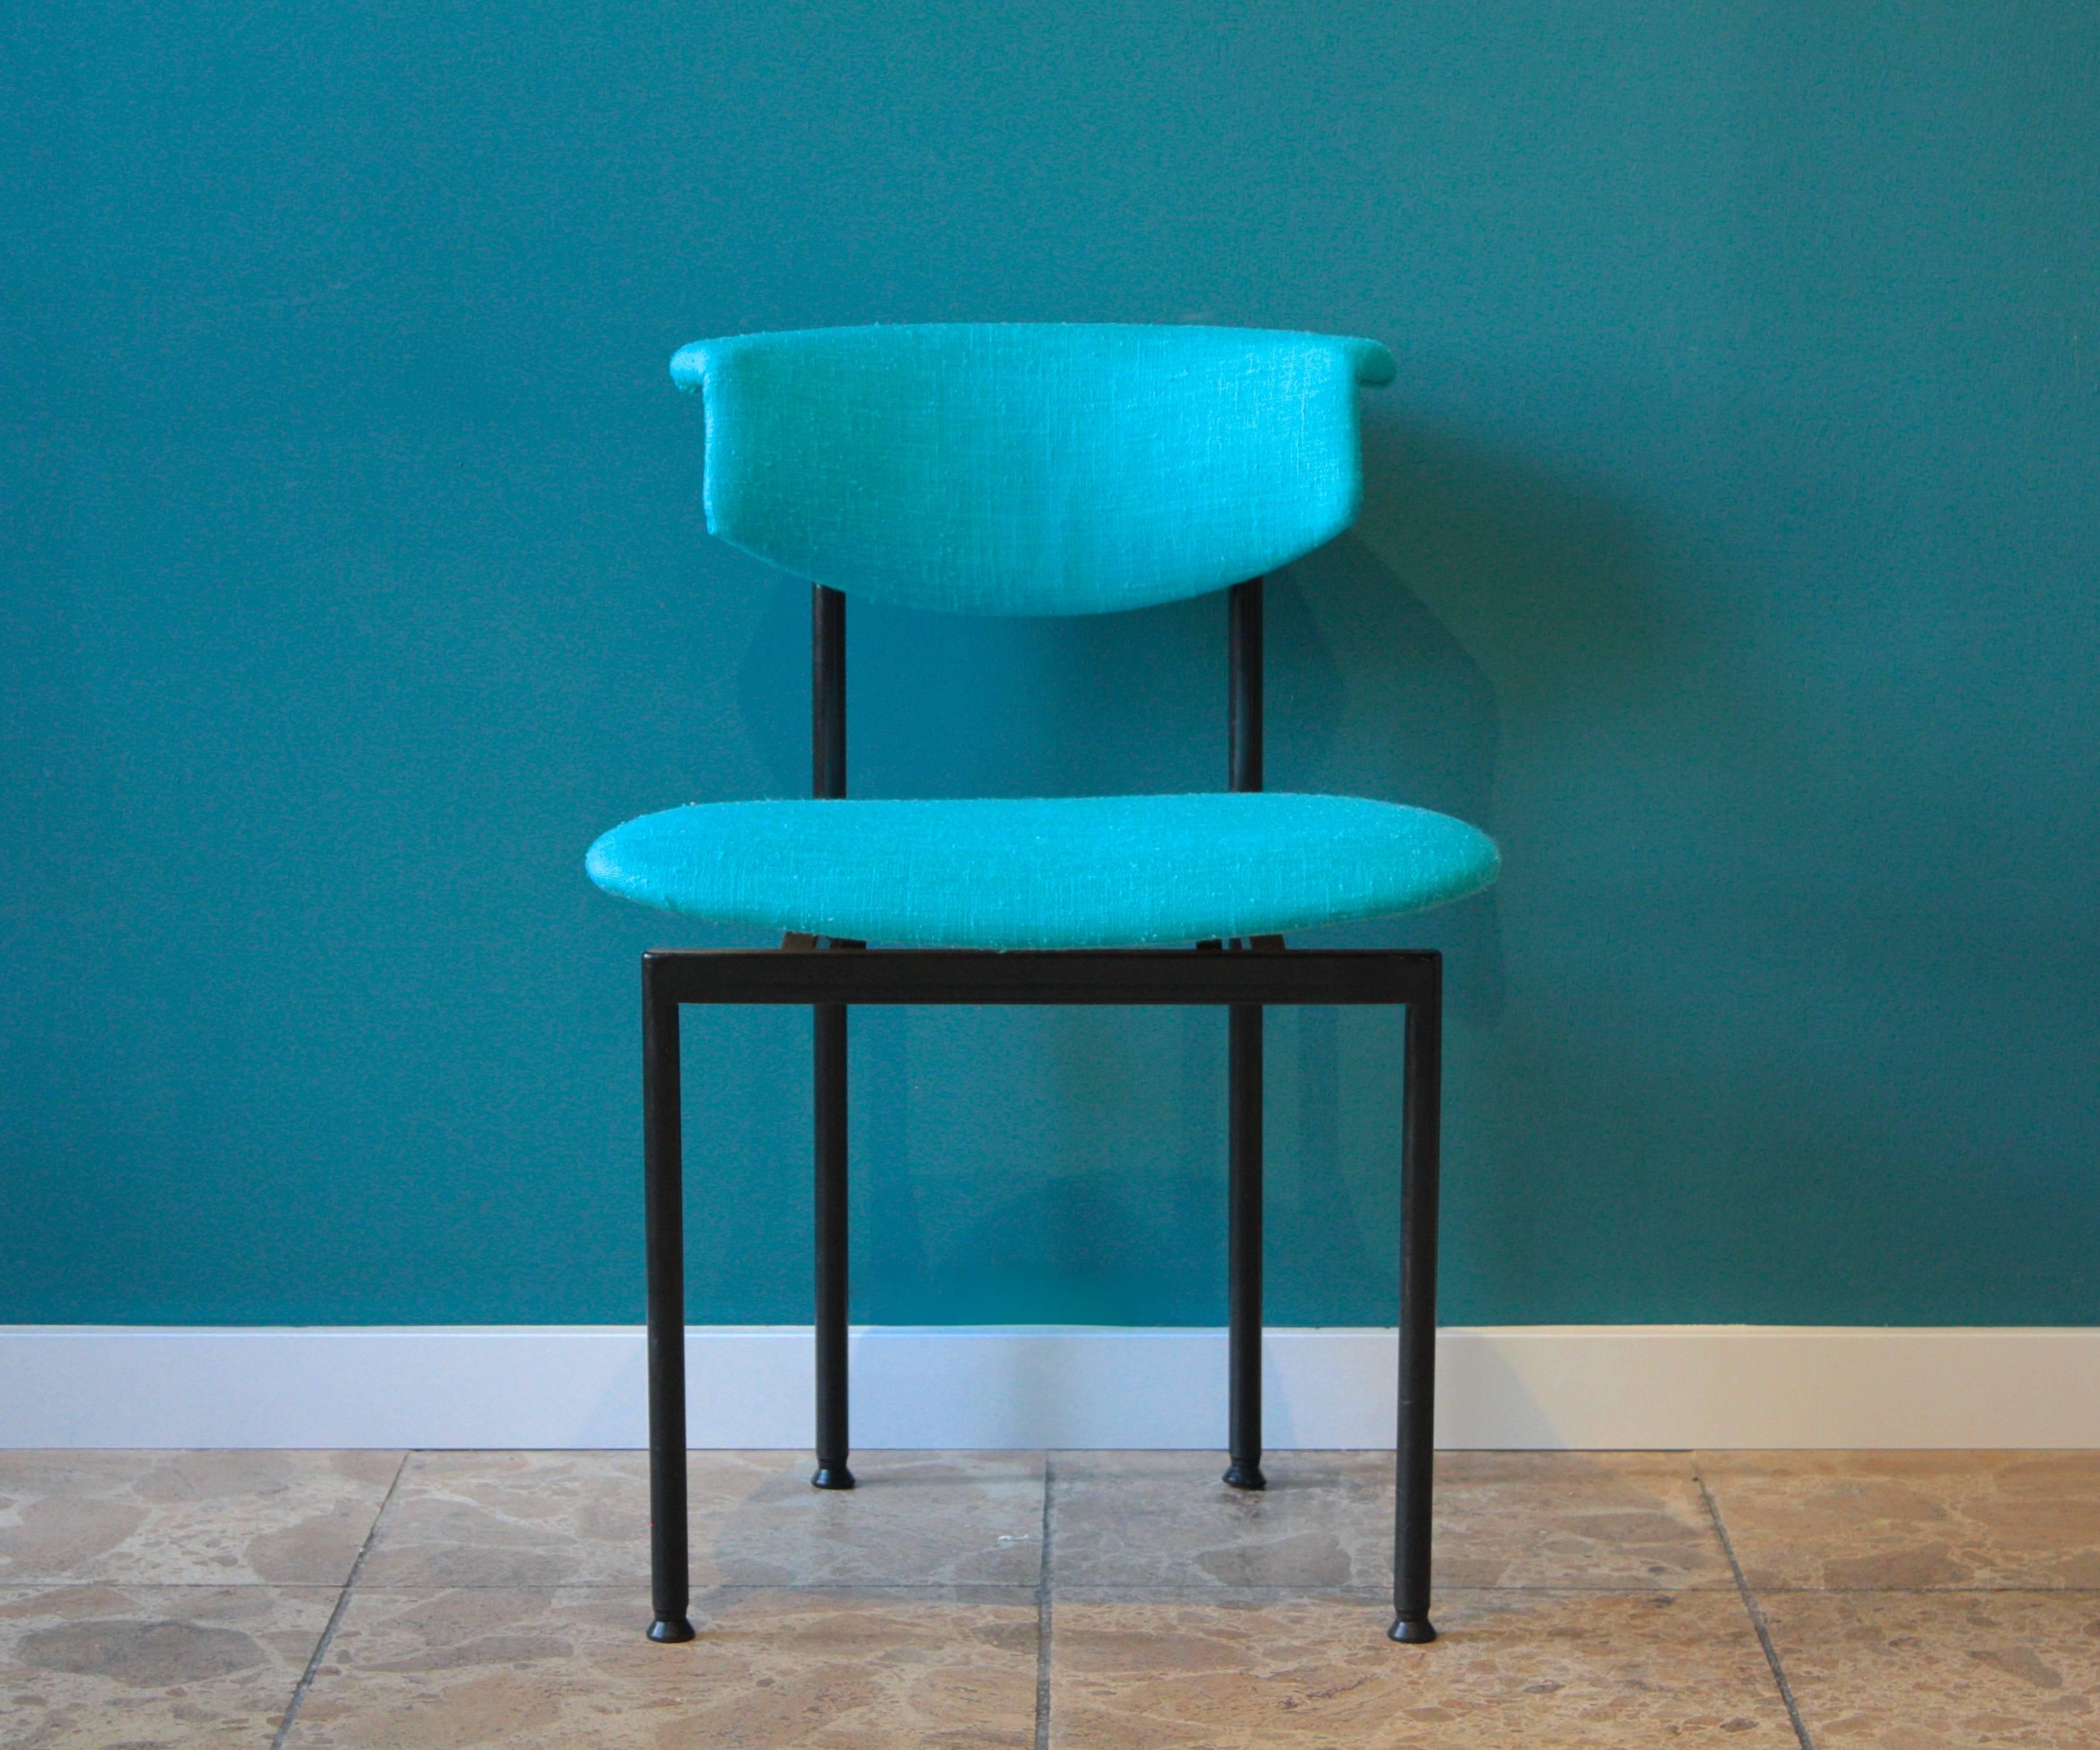 Set of six dining chairs, model alpha from the Meander series, designed by Rudolf Wolf. Manufactured by Meander (Netherlands) in the 1960s. Black lackered steel structure. The chairs have been reupholstered with a bright turquoise fabric.